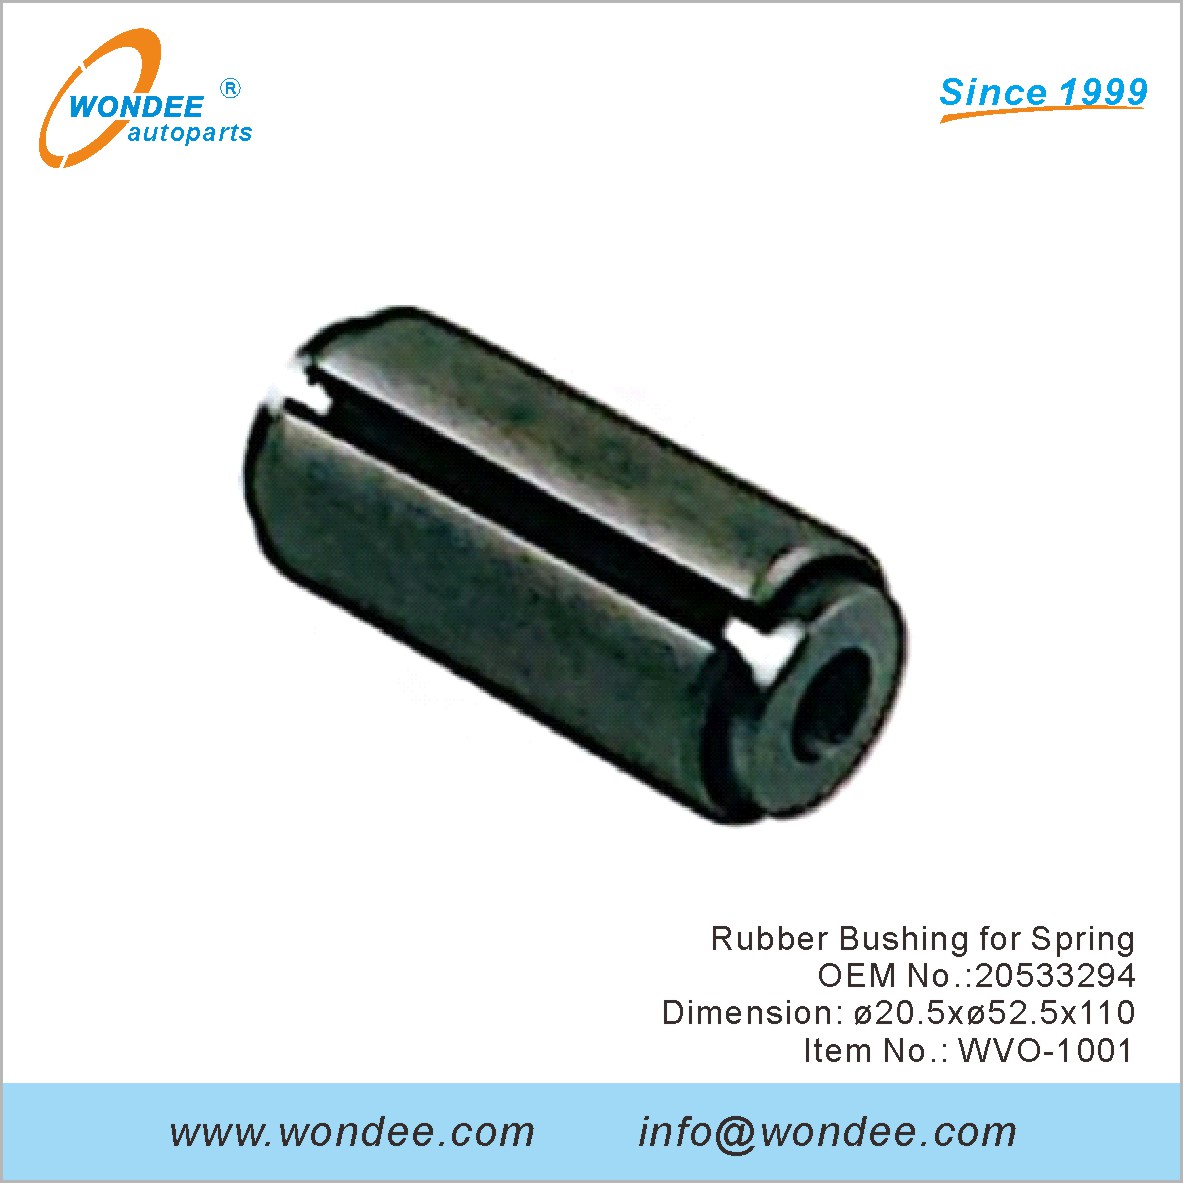 Rubber Bushing for Spring OEM 20533294 for Volvo from WONDEE